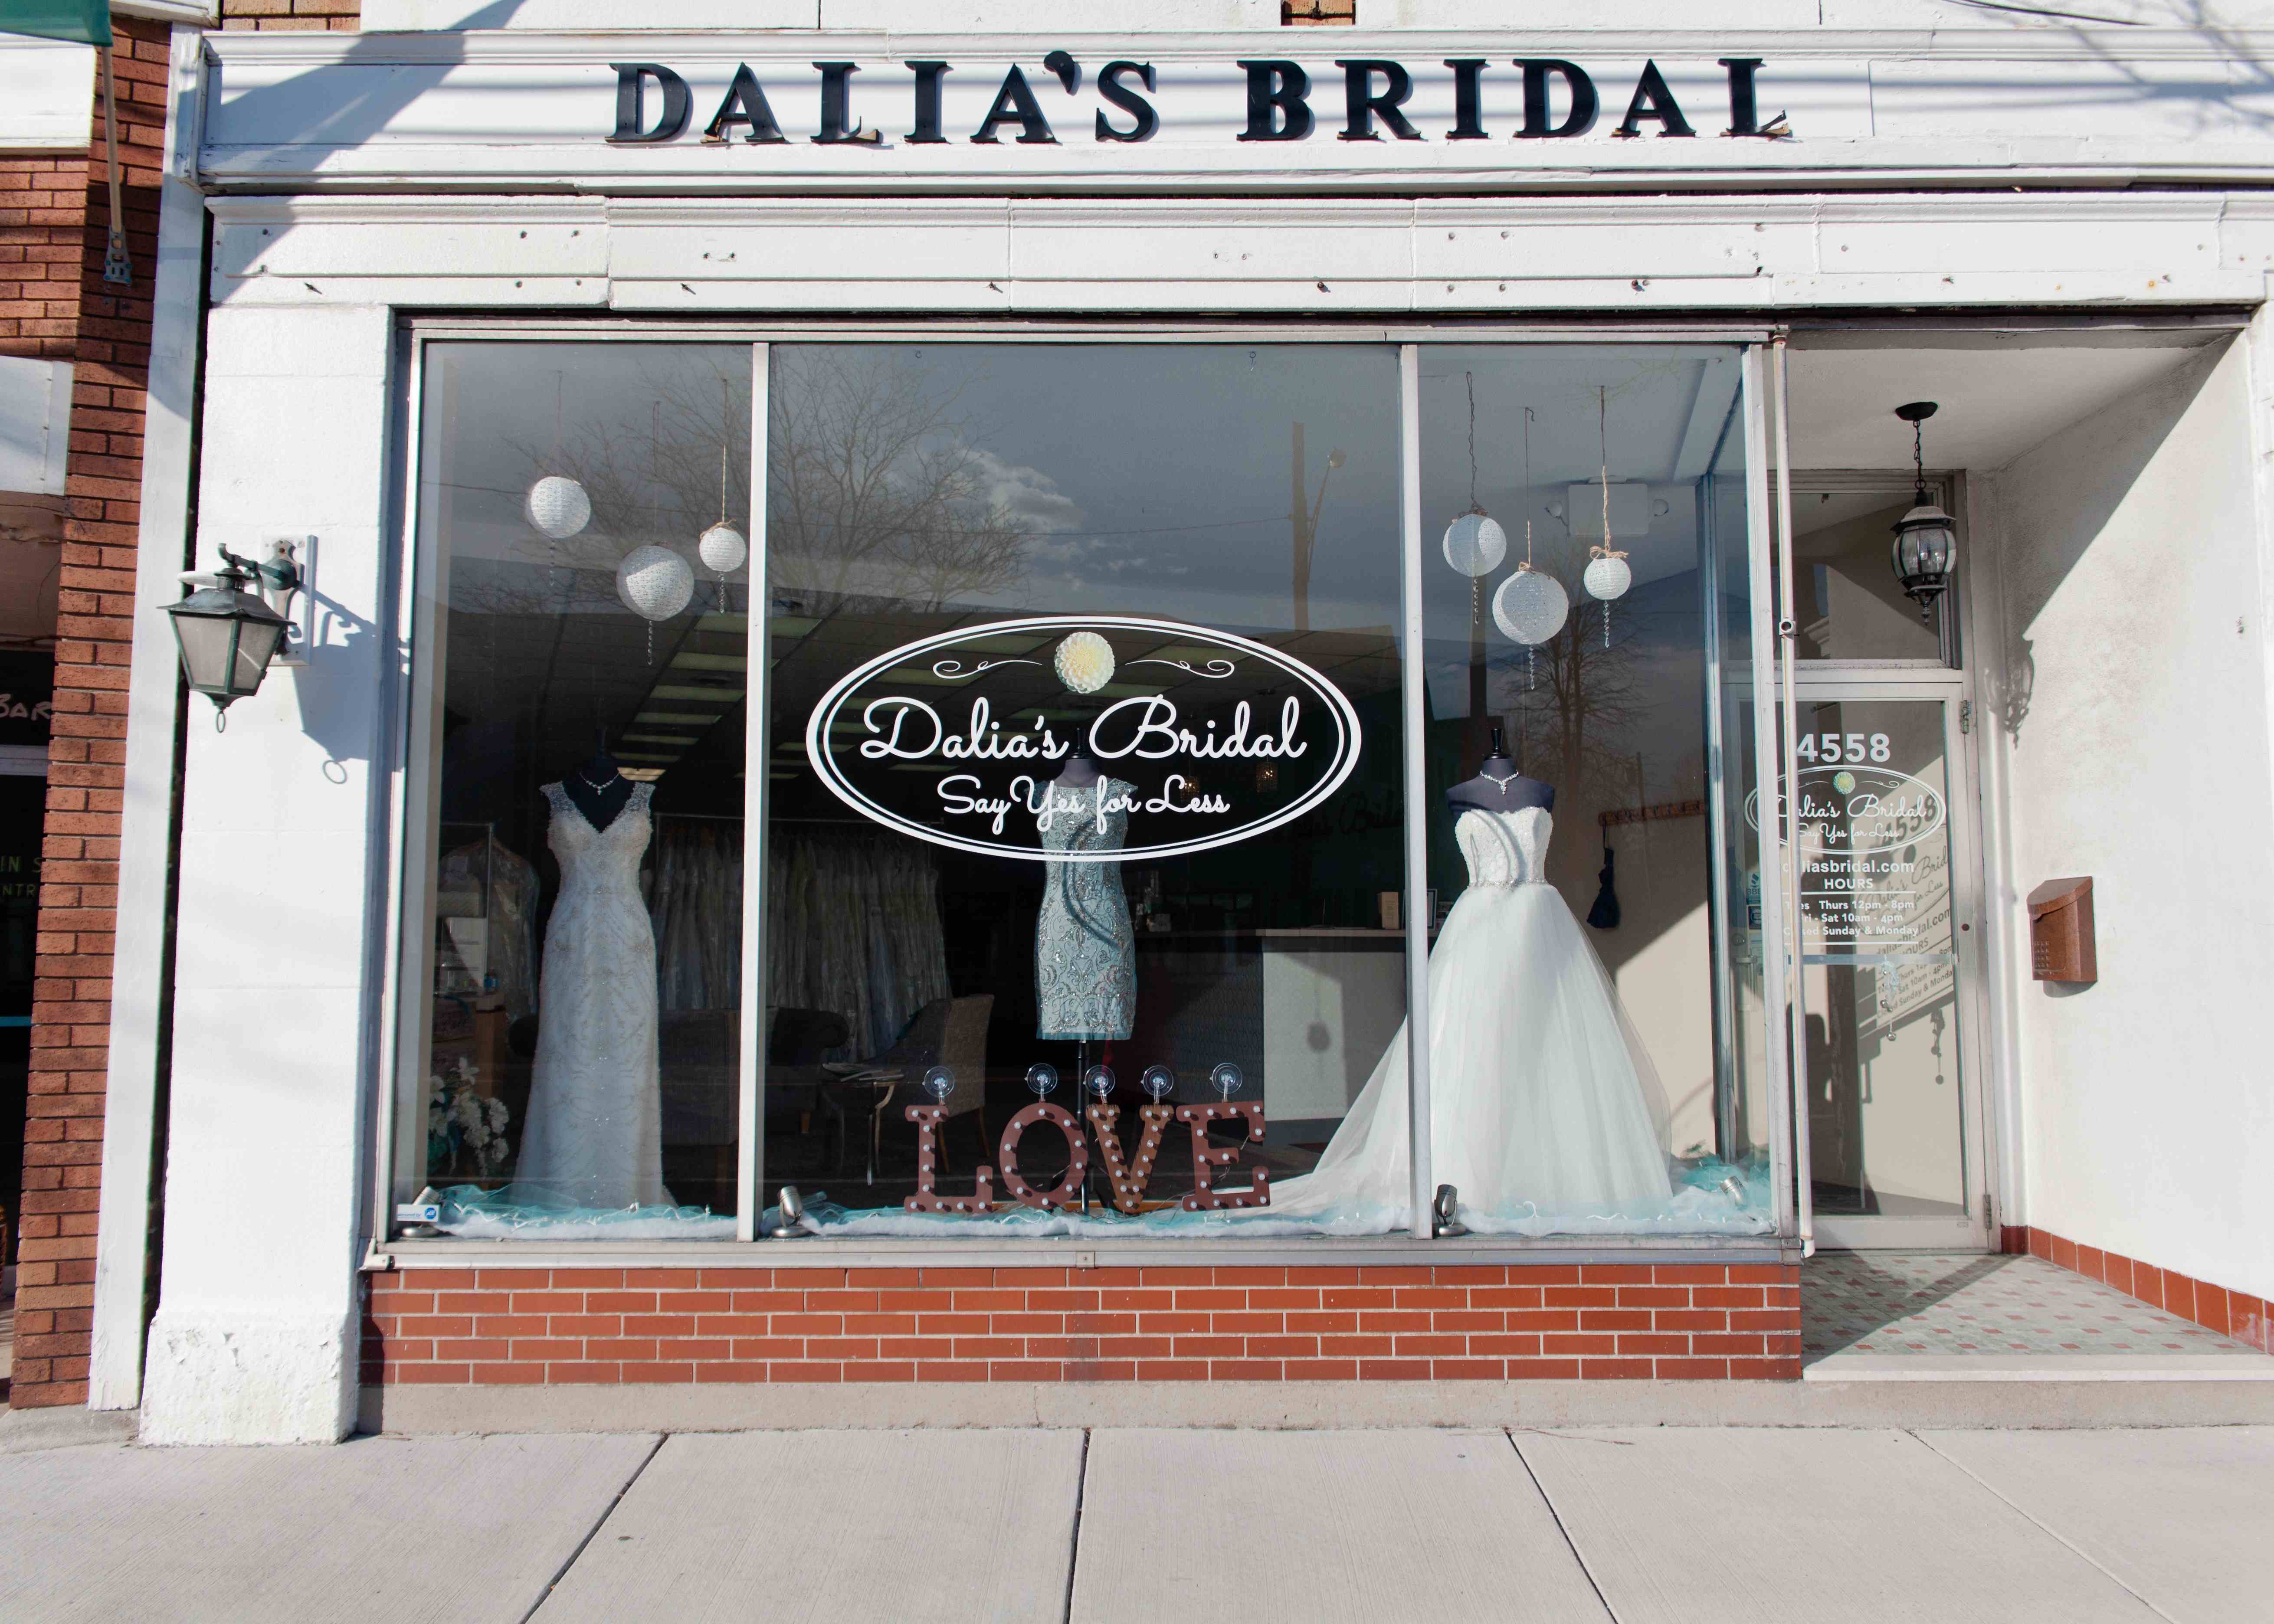 Dalia’s Bridal to hold month-long benefit for Food Bank of WNY